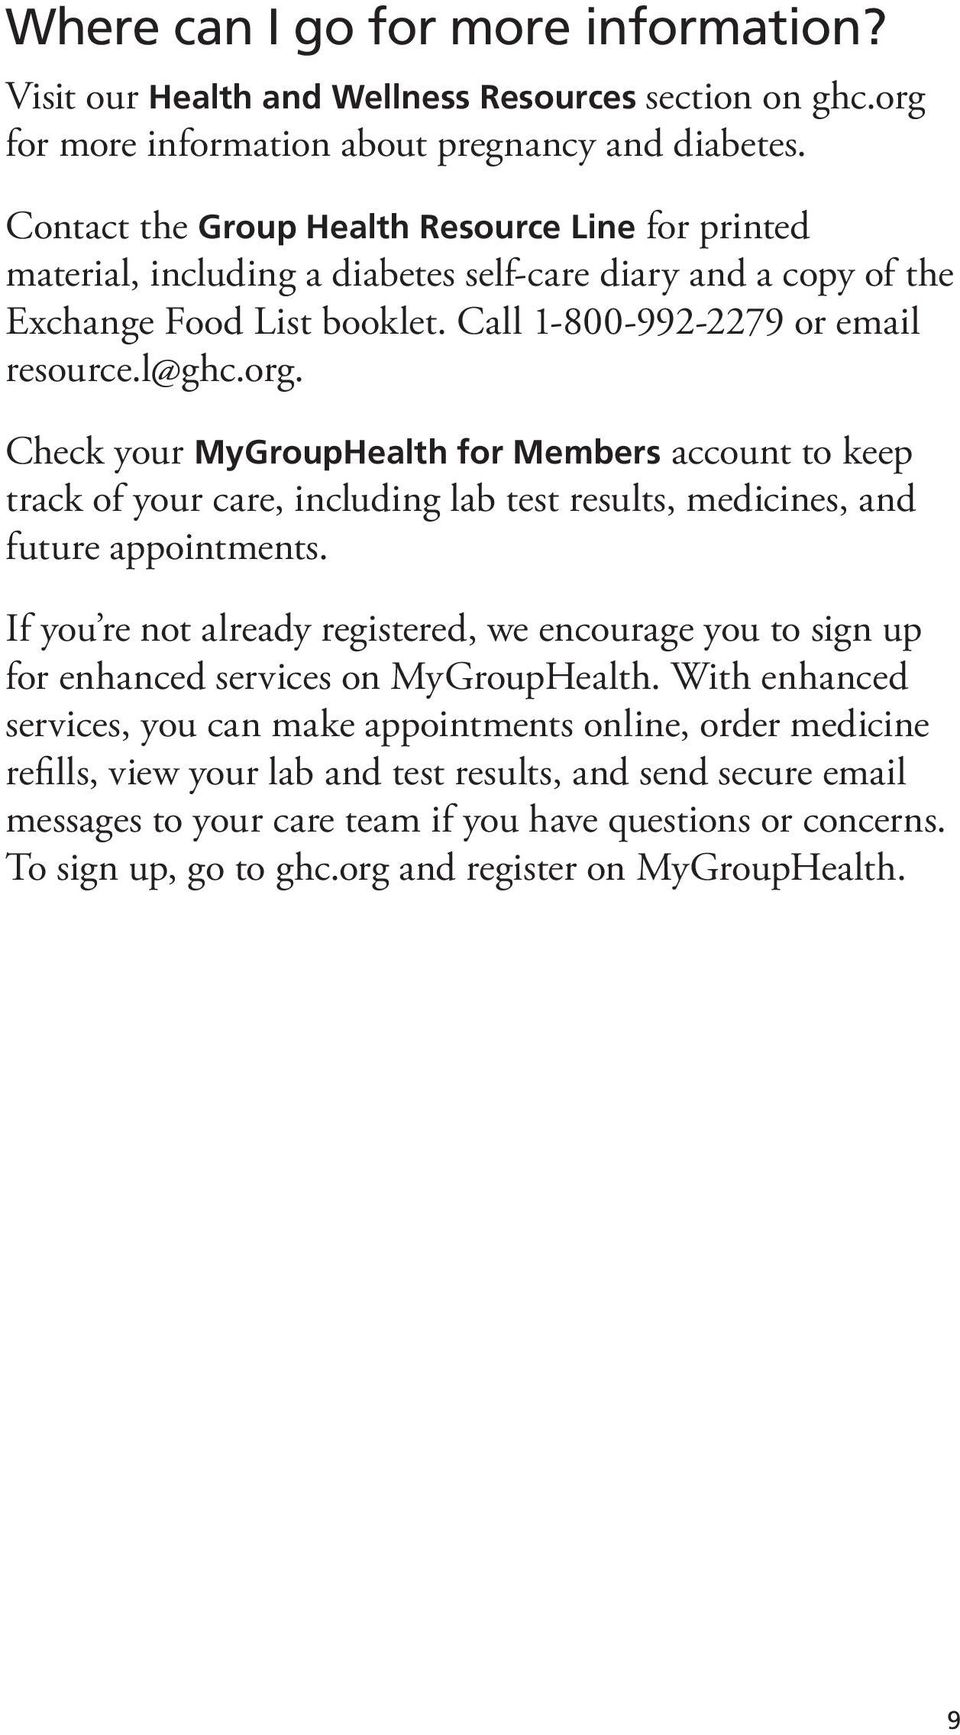 Check your MyGroupHealth for Members account to keep track of your care, including lab test results, medicines, and future appointments.